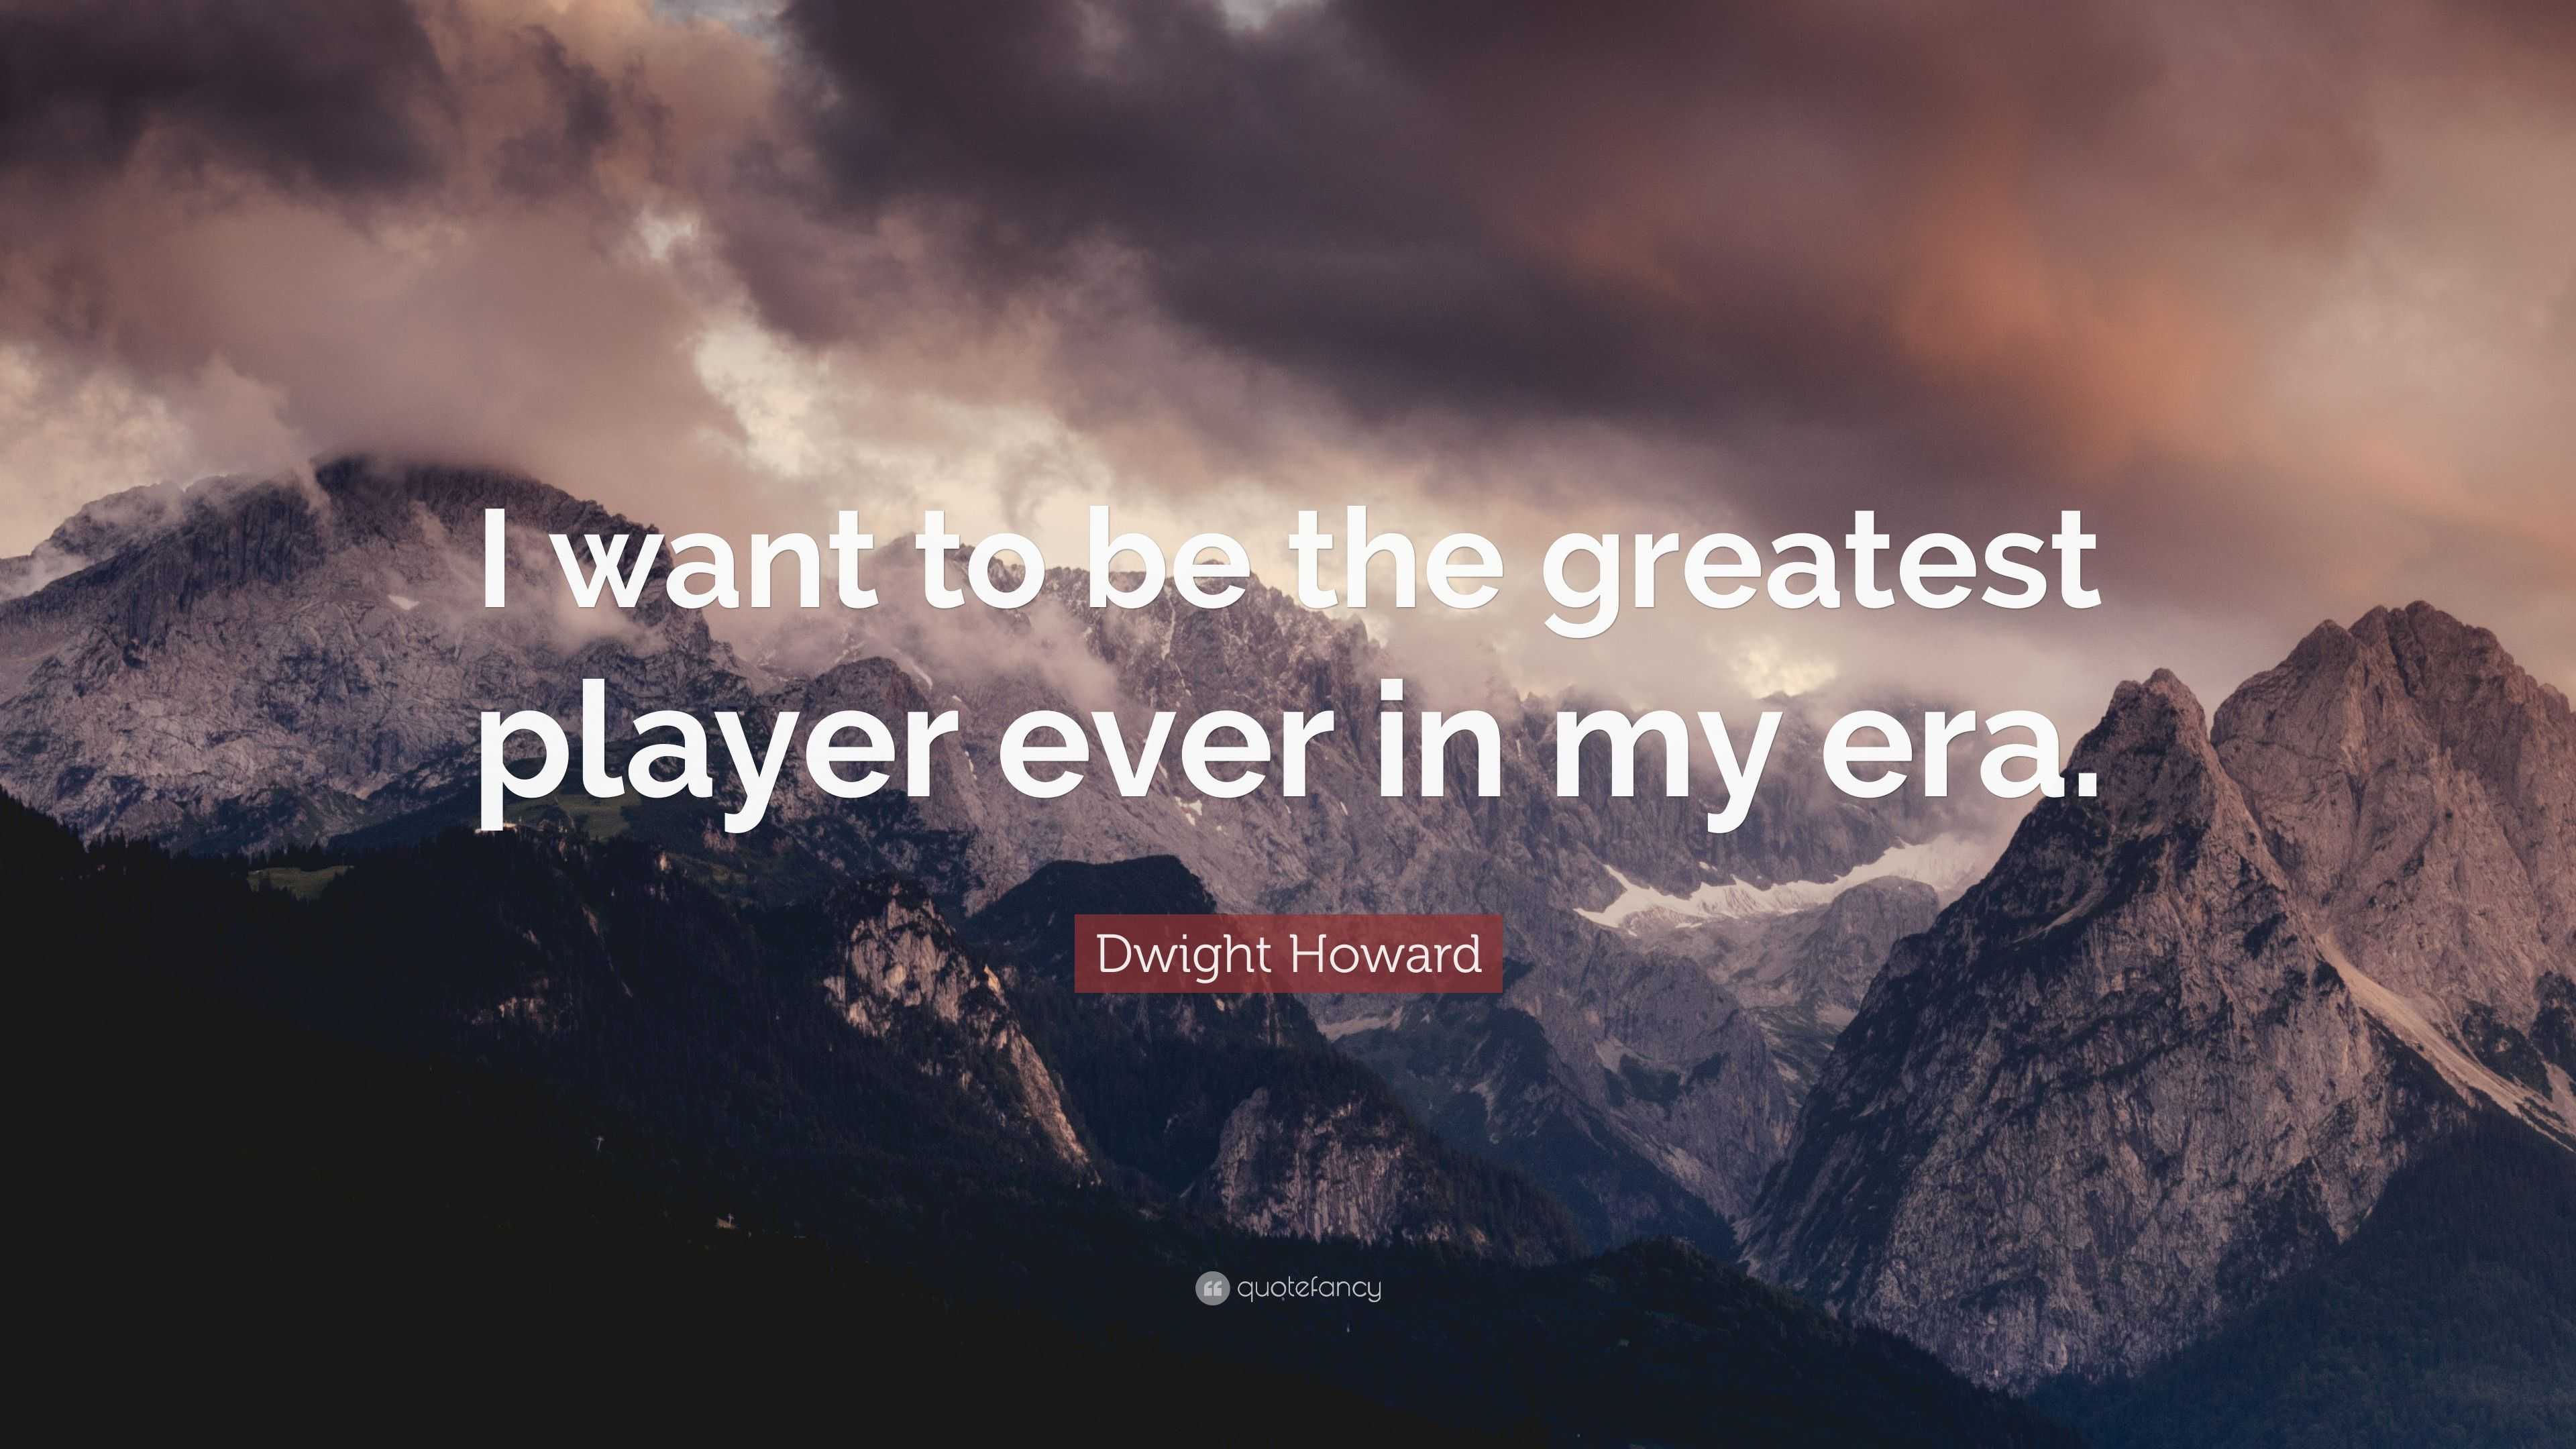 Dwight Howard Quote: “I want to be the greatest player ever in my era.”